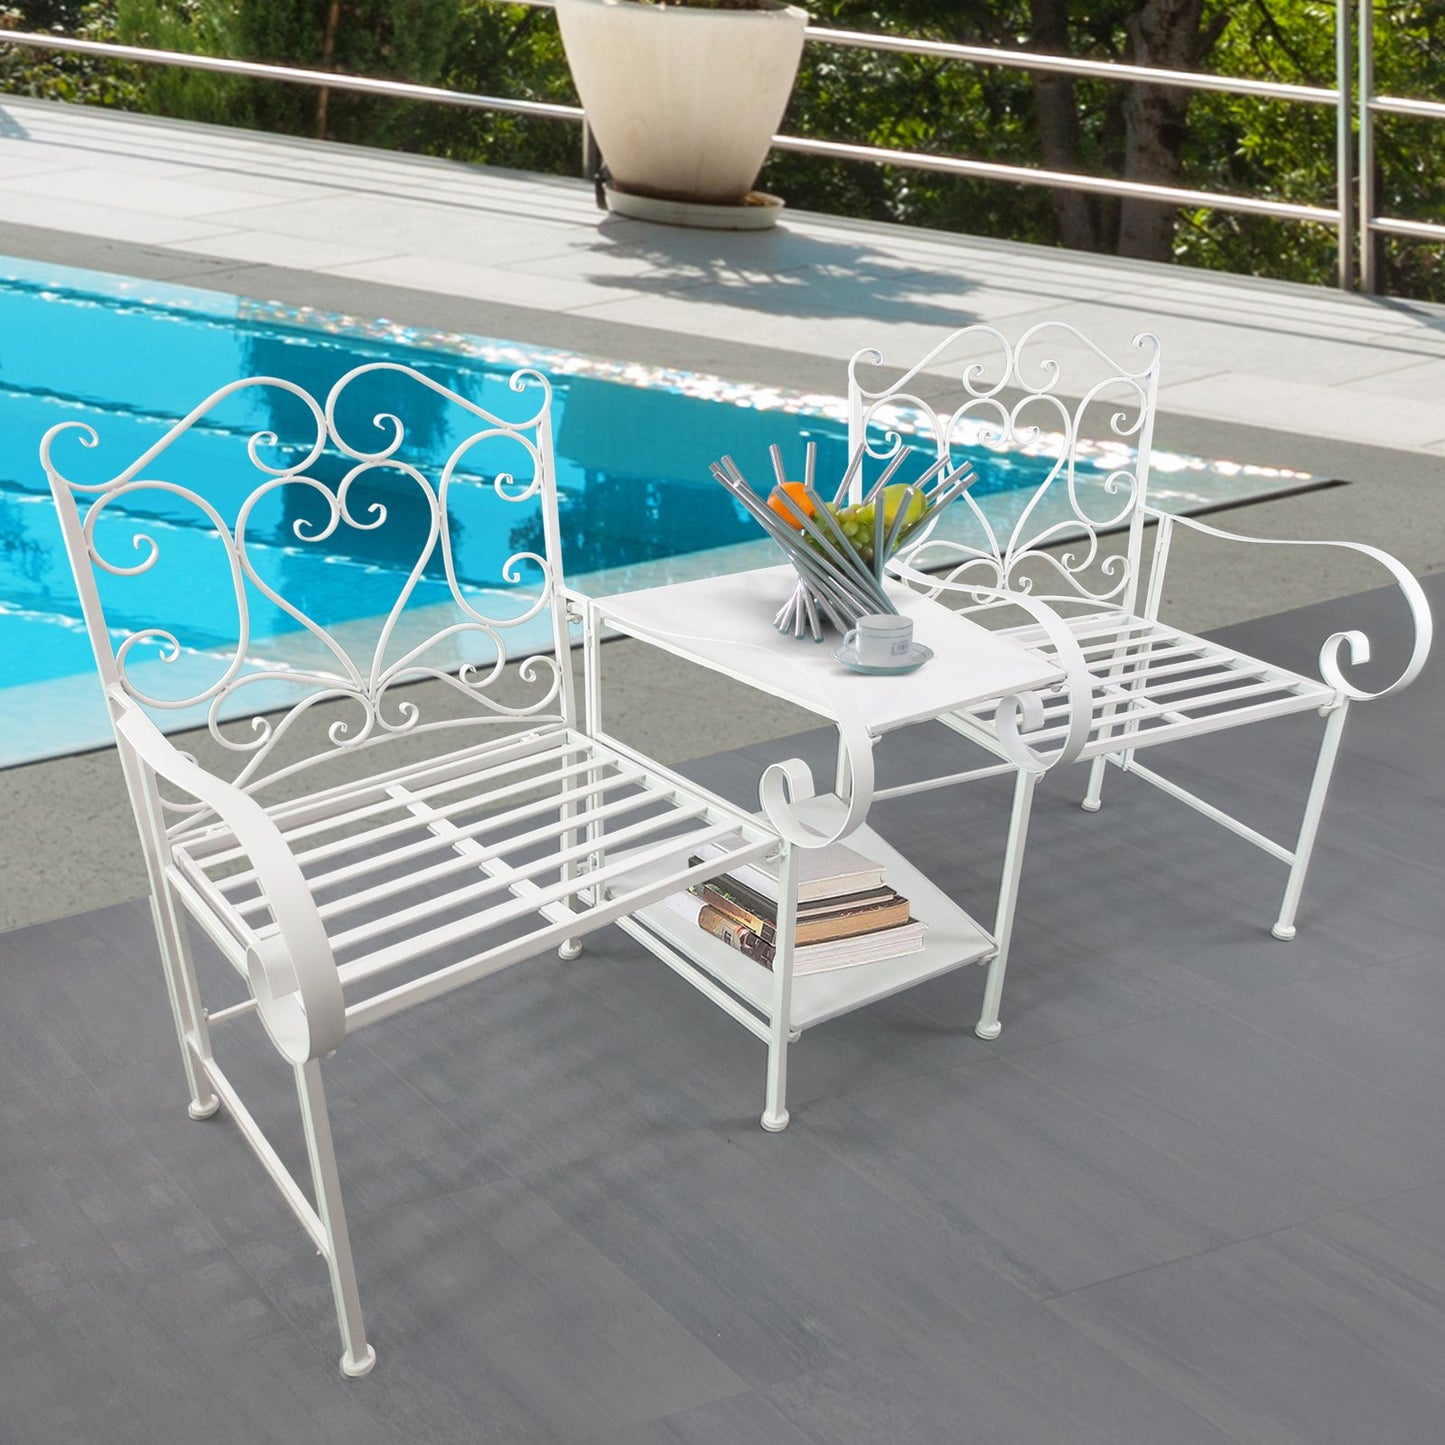 Outsunny Metal Bench With Table, 160Lx61Wx96H cm-White